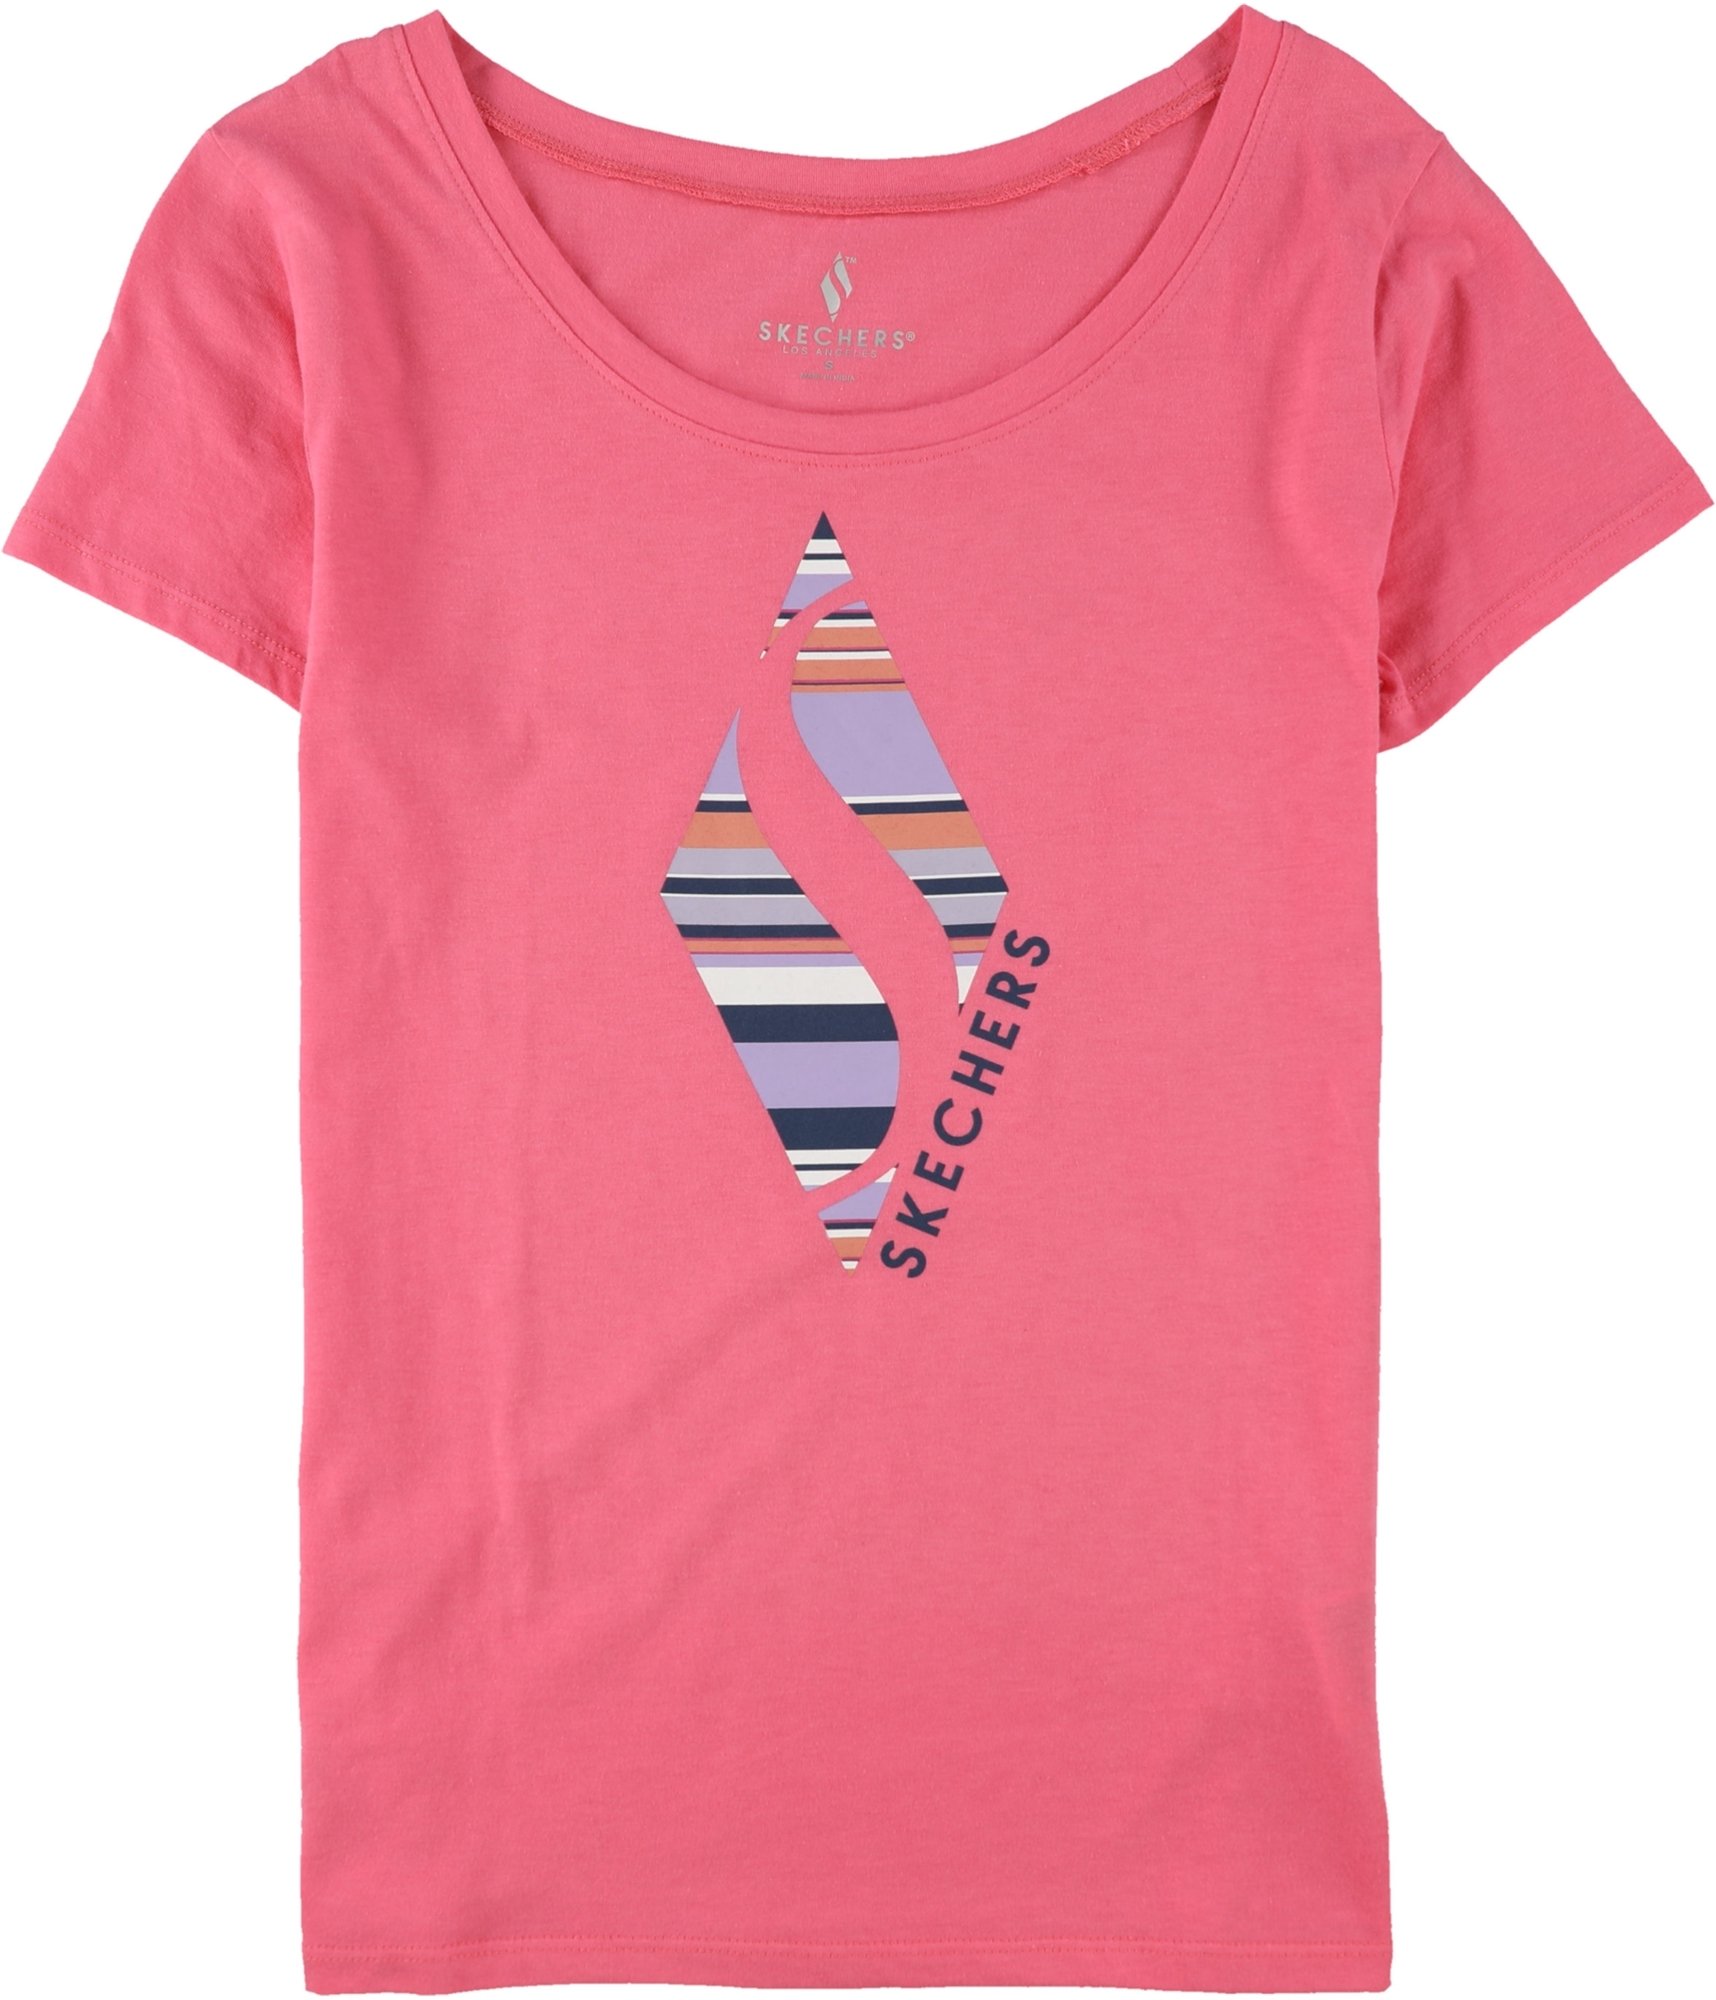 Buy a Skechers Womens Striped Graphic Tagsweekly Diamond T-Shirt 